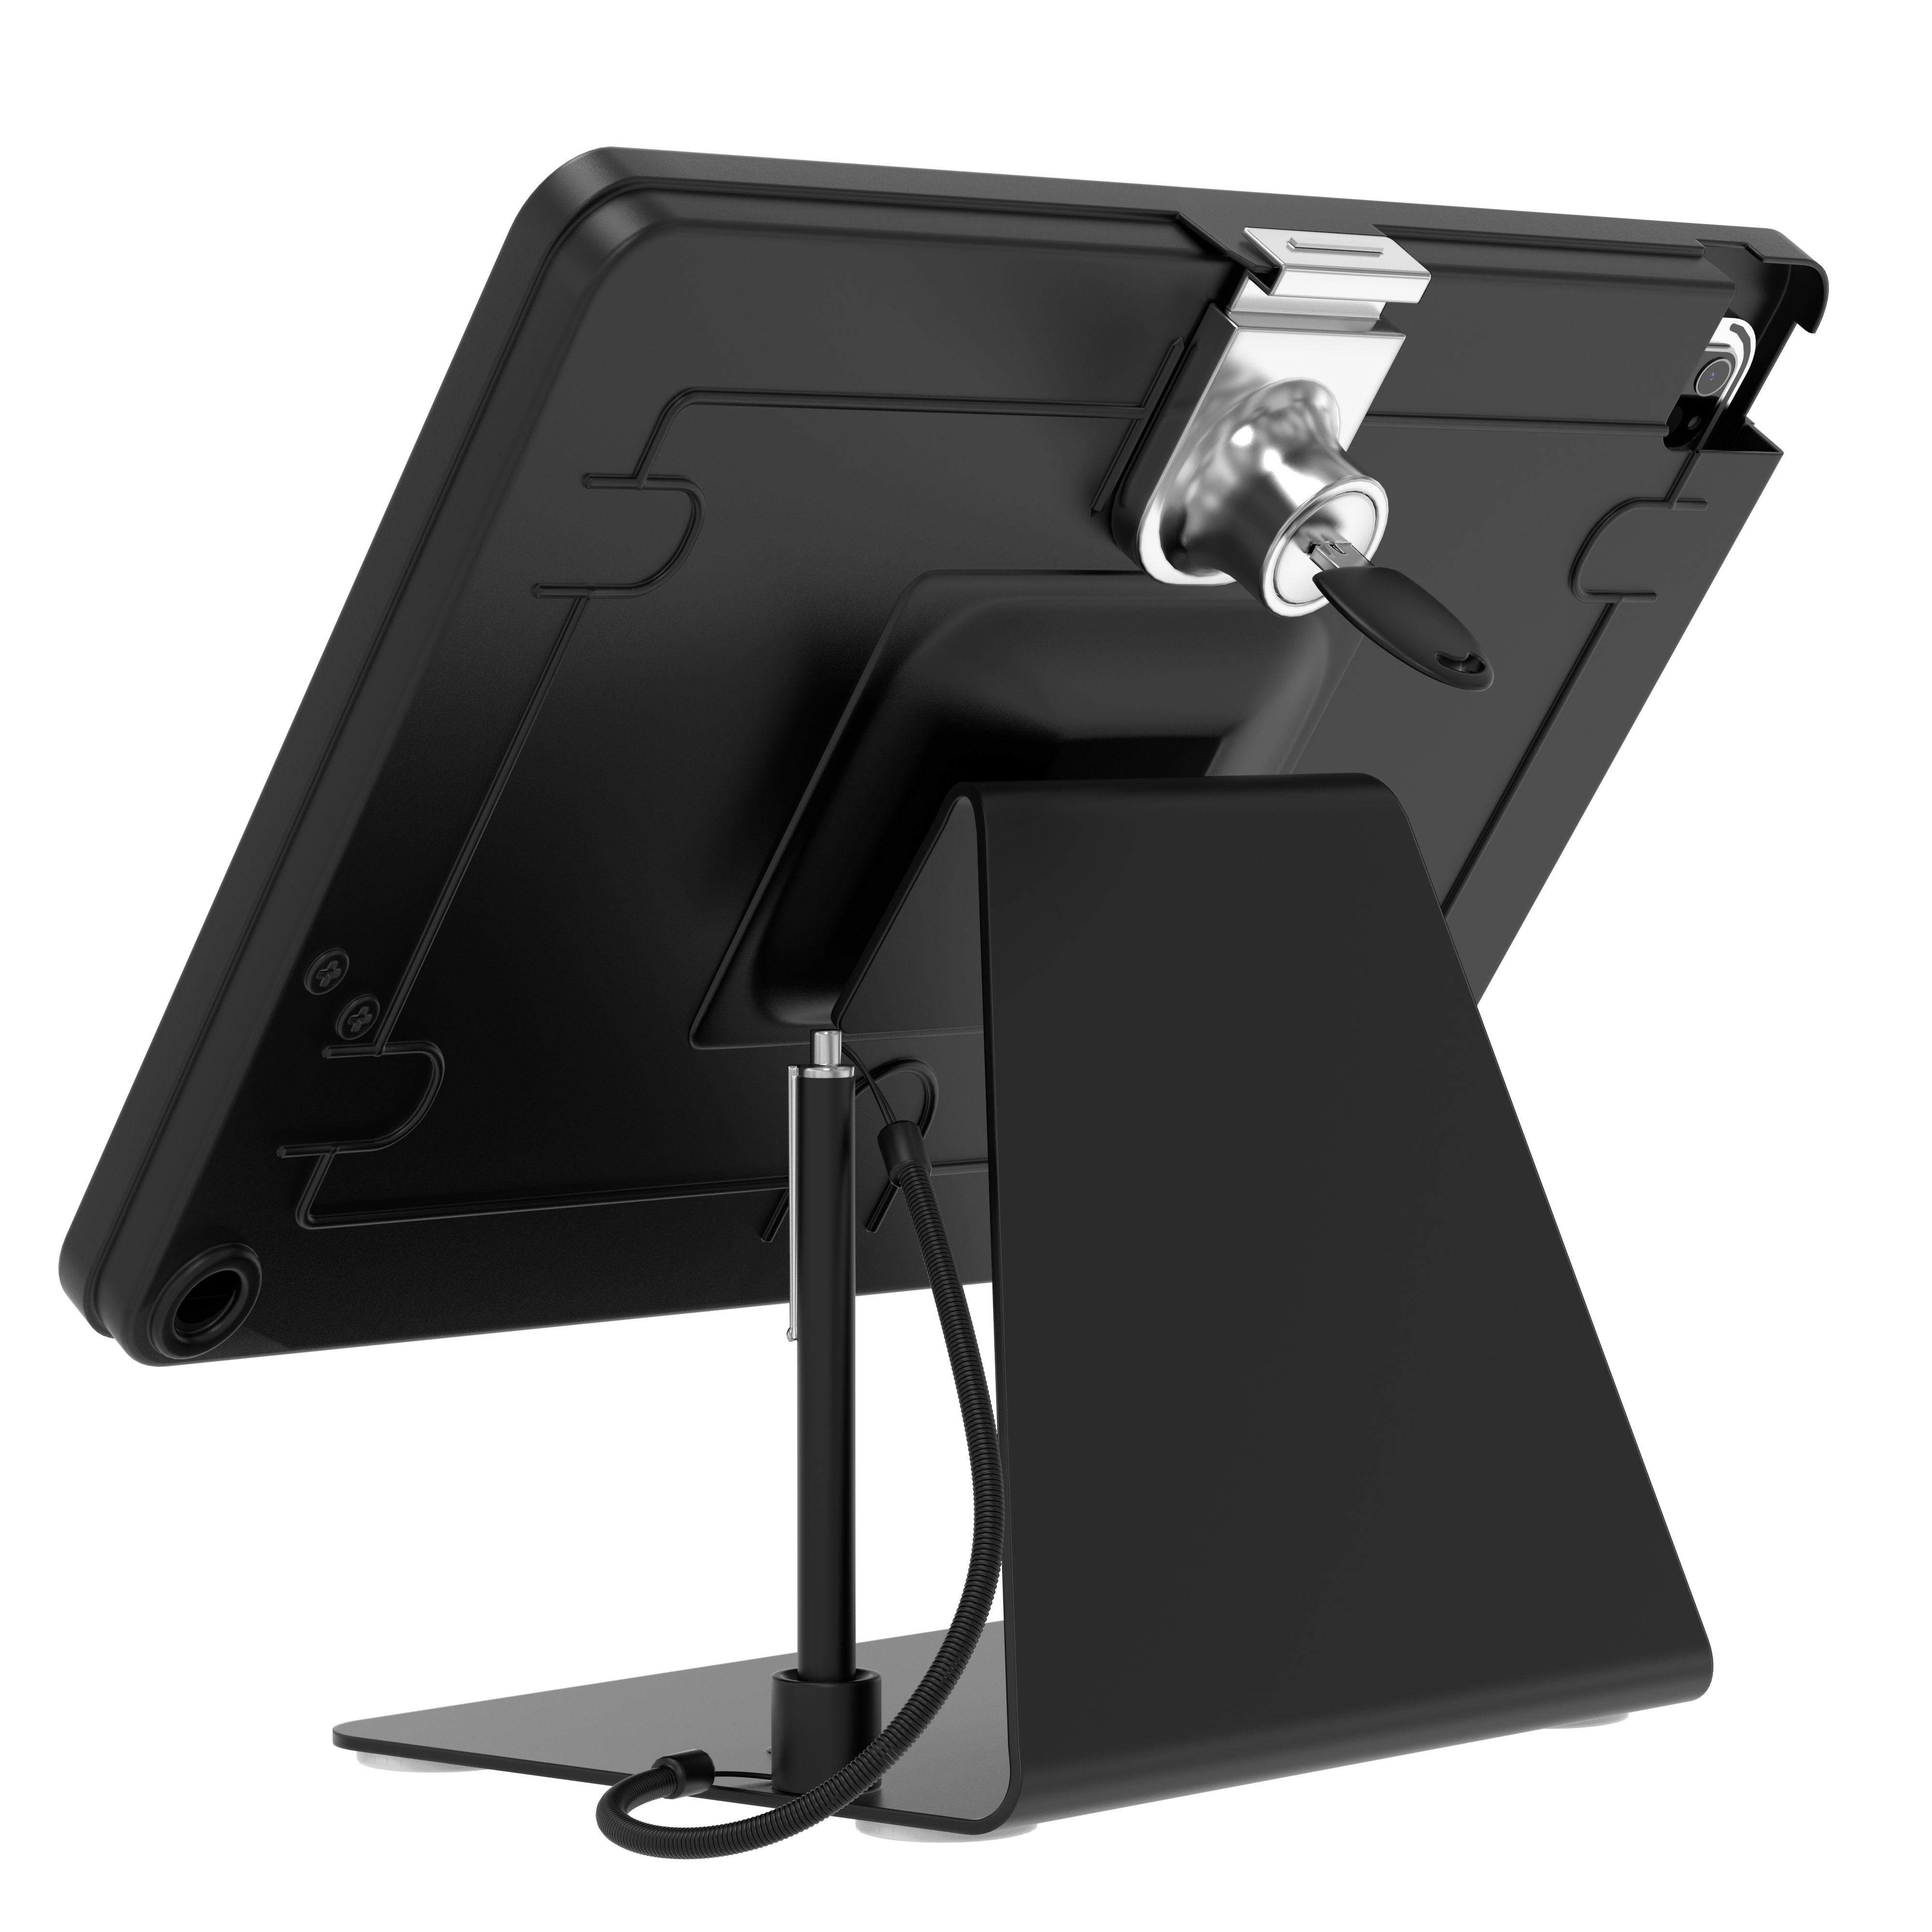 Anti-Theft Kiosk with Fitted Security Enclosure for 11-13" Tablets